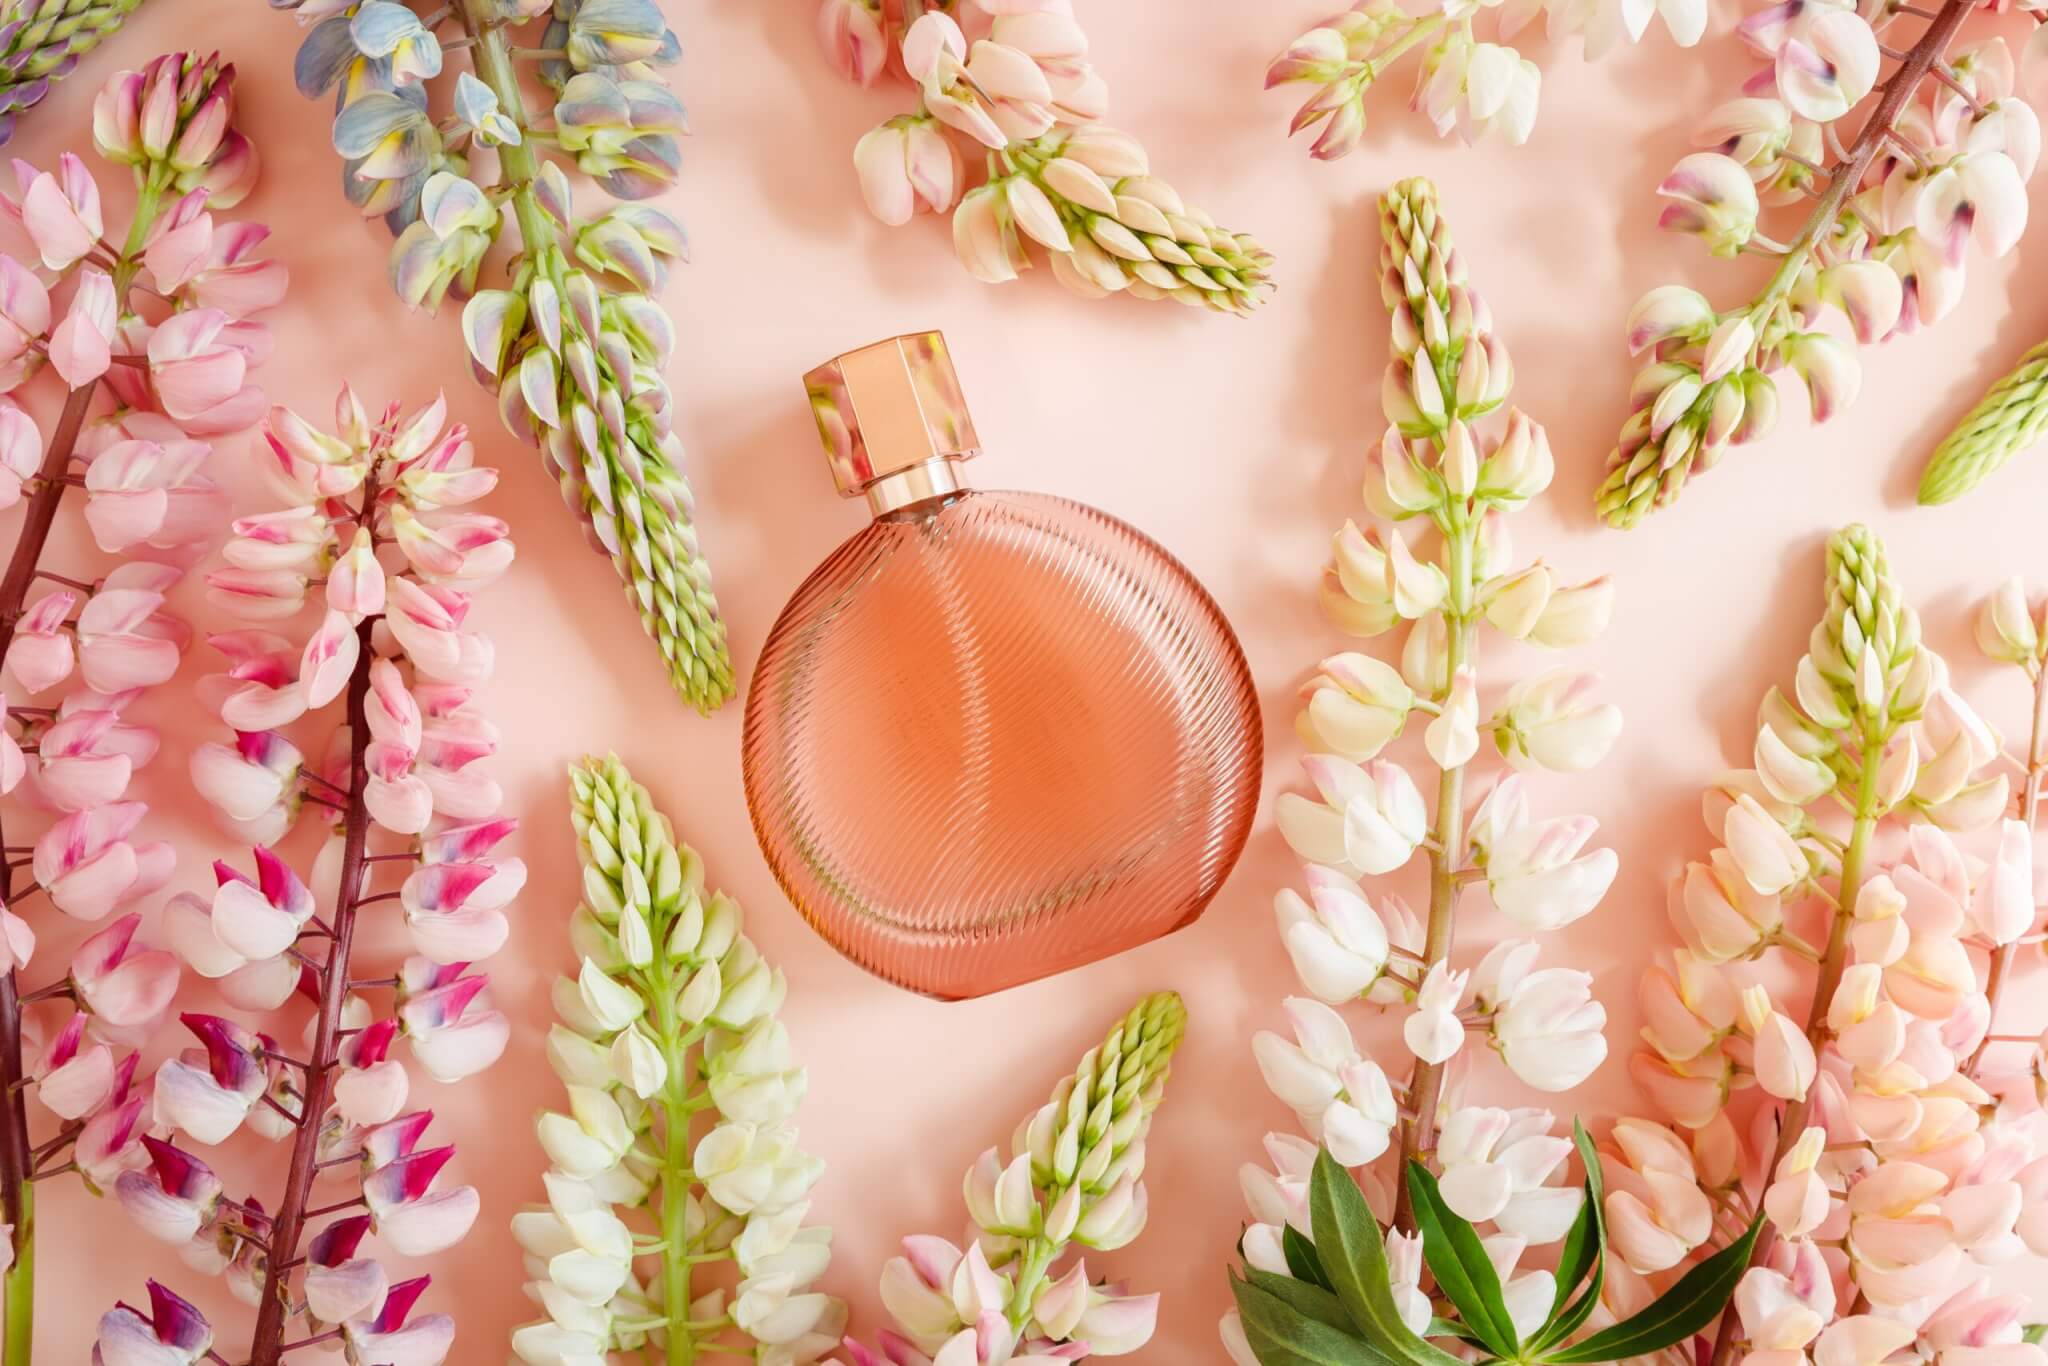 Best Floral Perfumes: Top 7 Scents Most Recommended By Experts